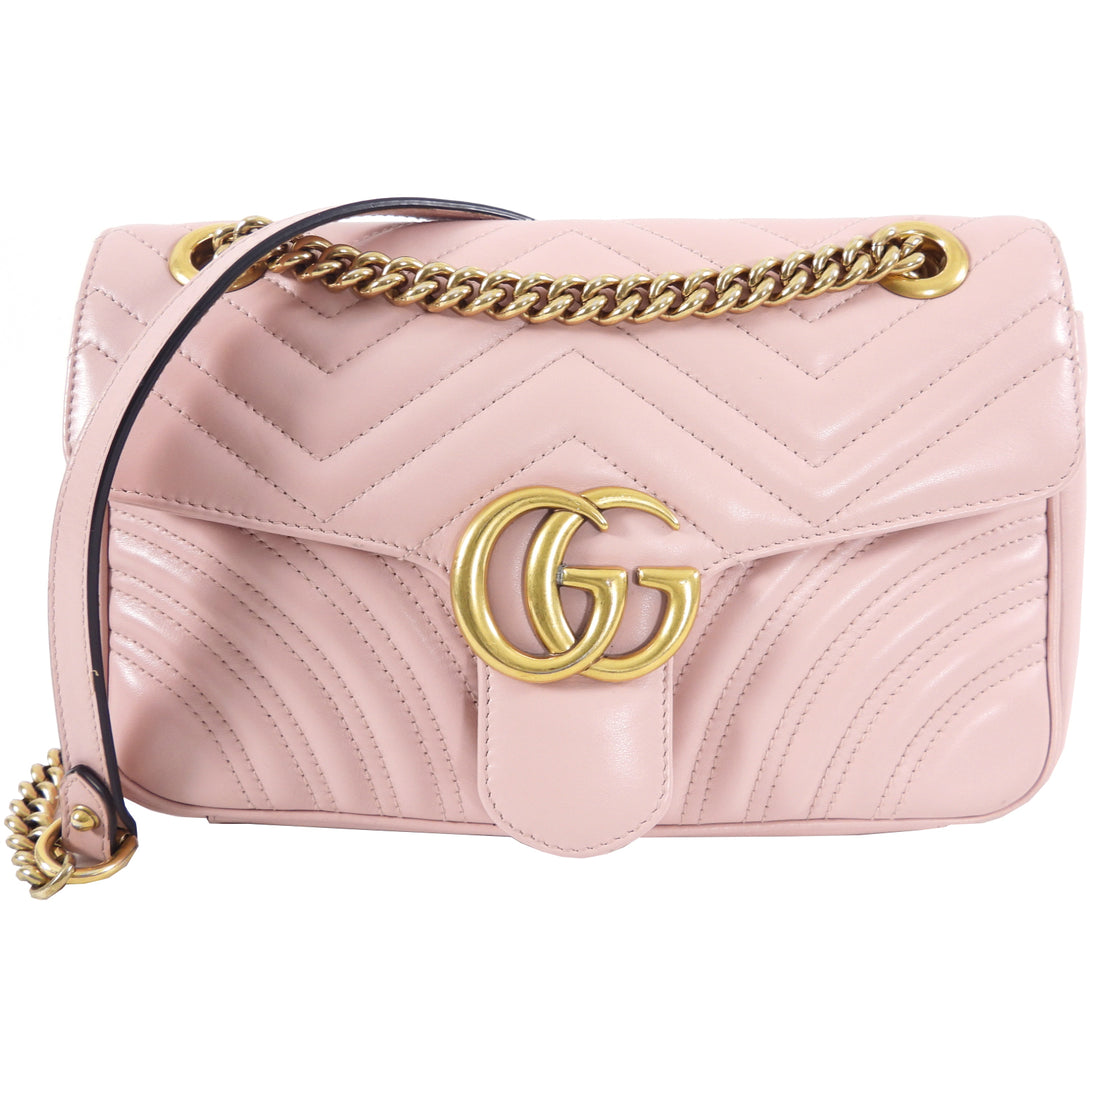 Gucci - Authenticated GG Marmont Flap Handbag - Leather Pink Plain for Women, Good Condition